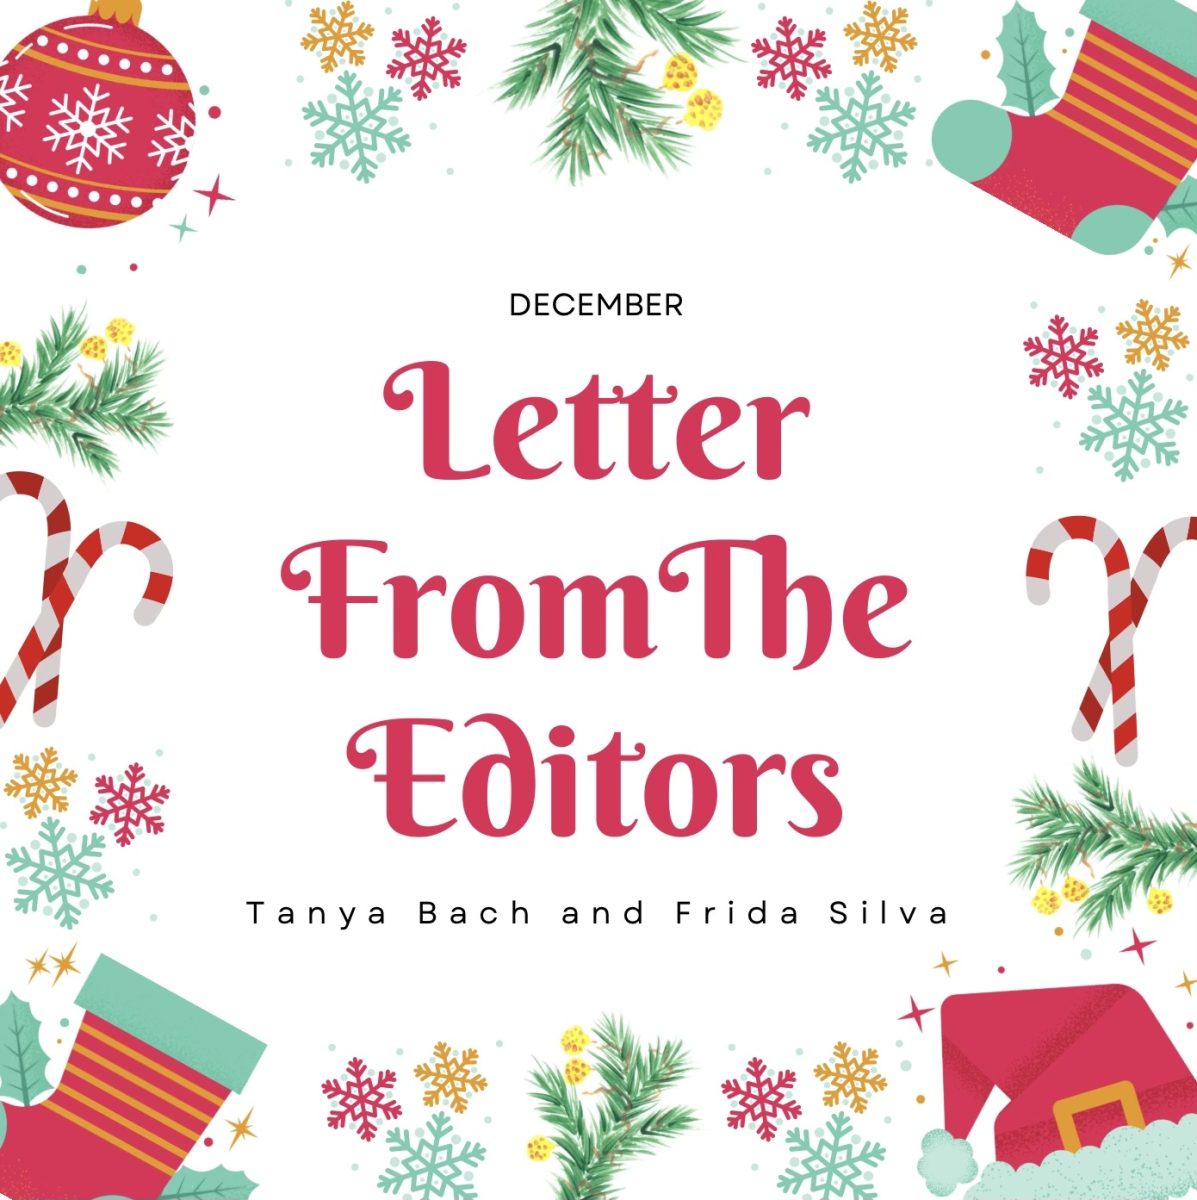 December Letter from the Editor